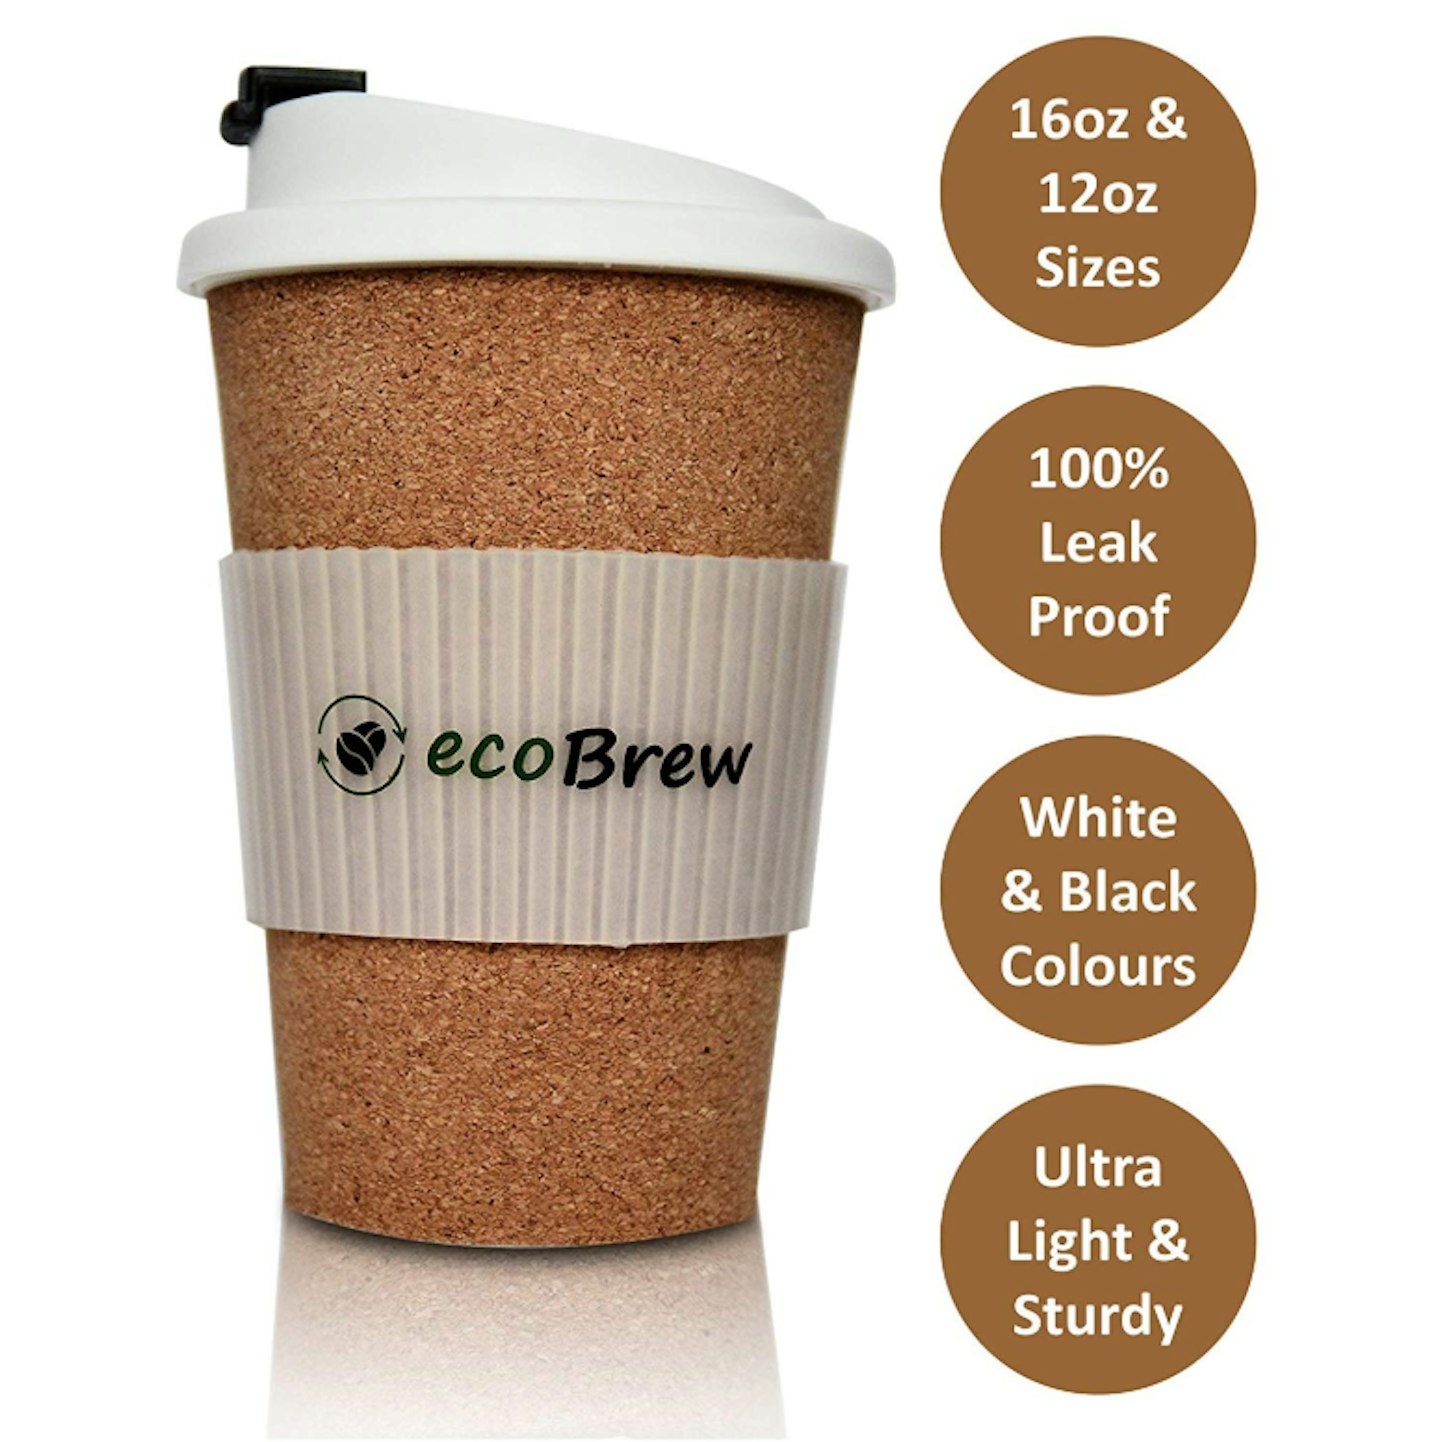 ecoBrew ecobrew 12oz double wall glass tumbler with lid, insulated